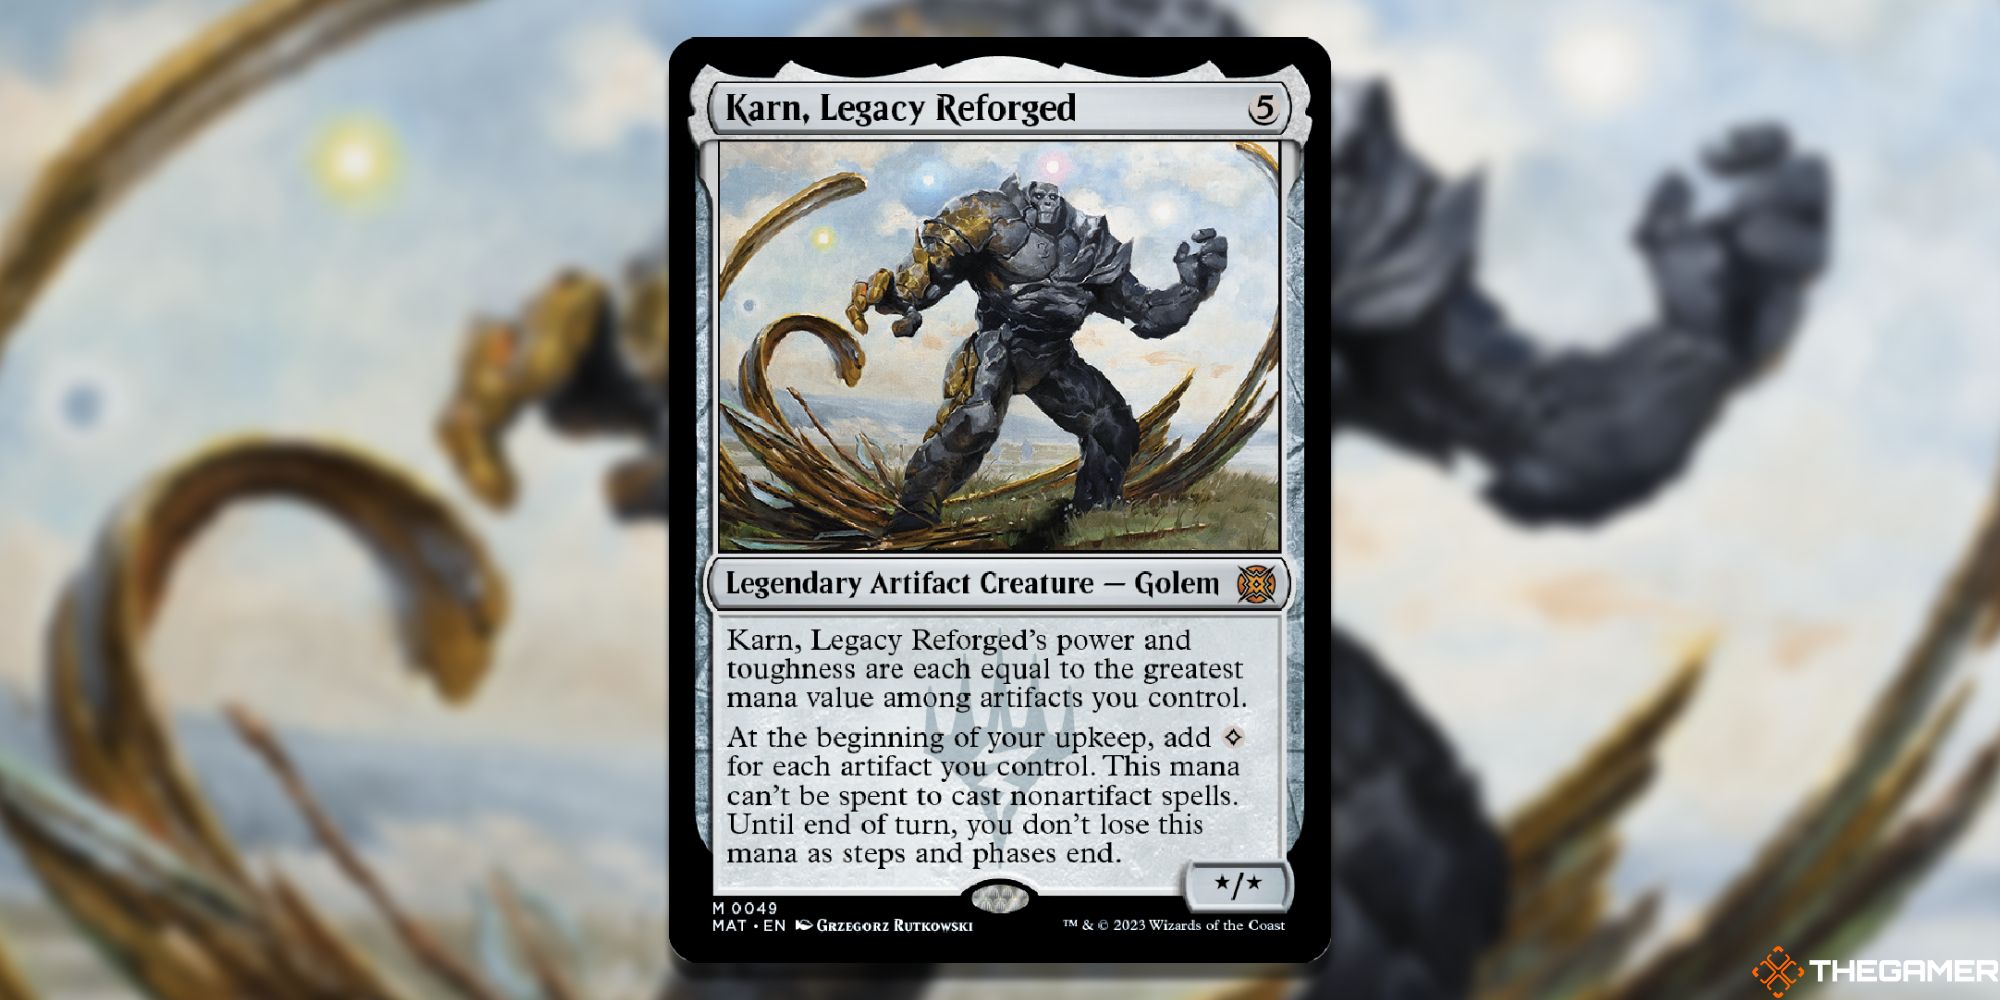  Image of the Karn, Legacy Reforged card in Magic: The Gathering, with art by Grzegorz Rutkowski